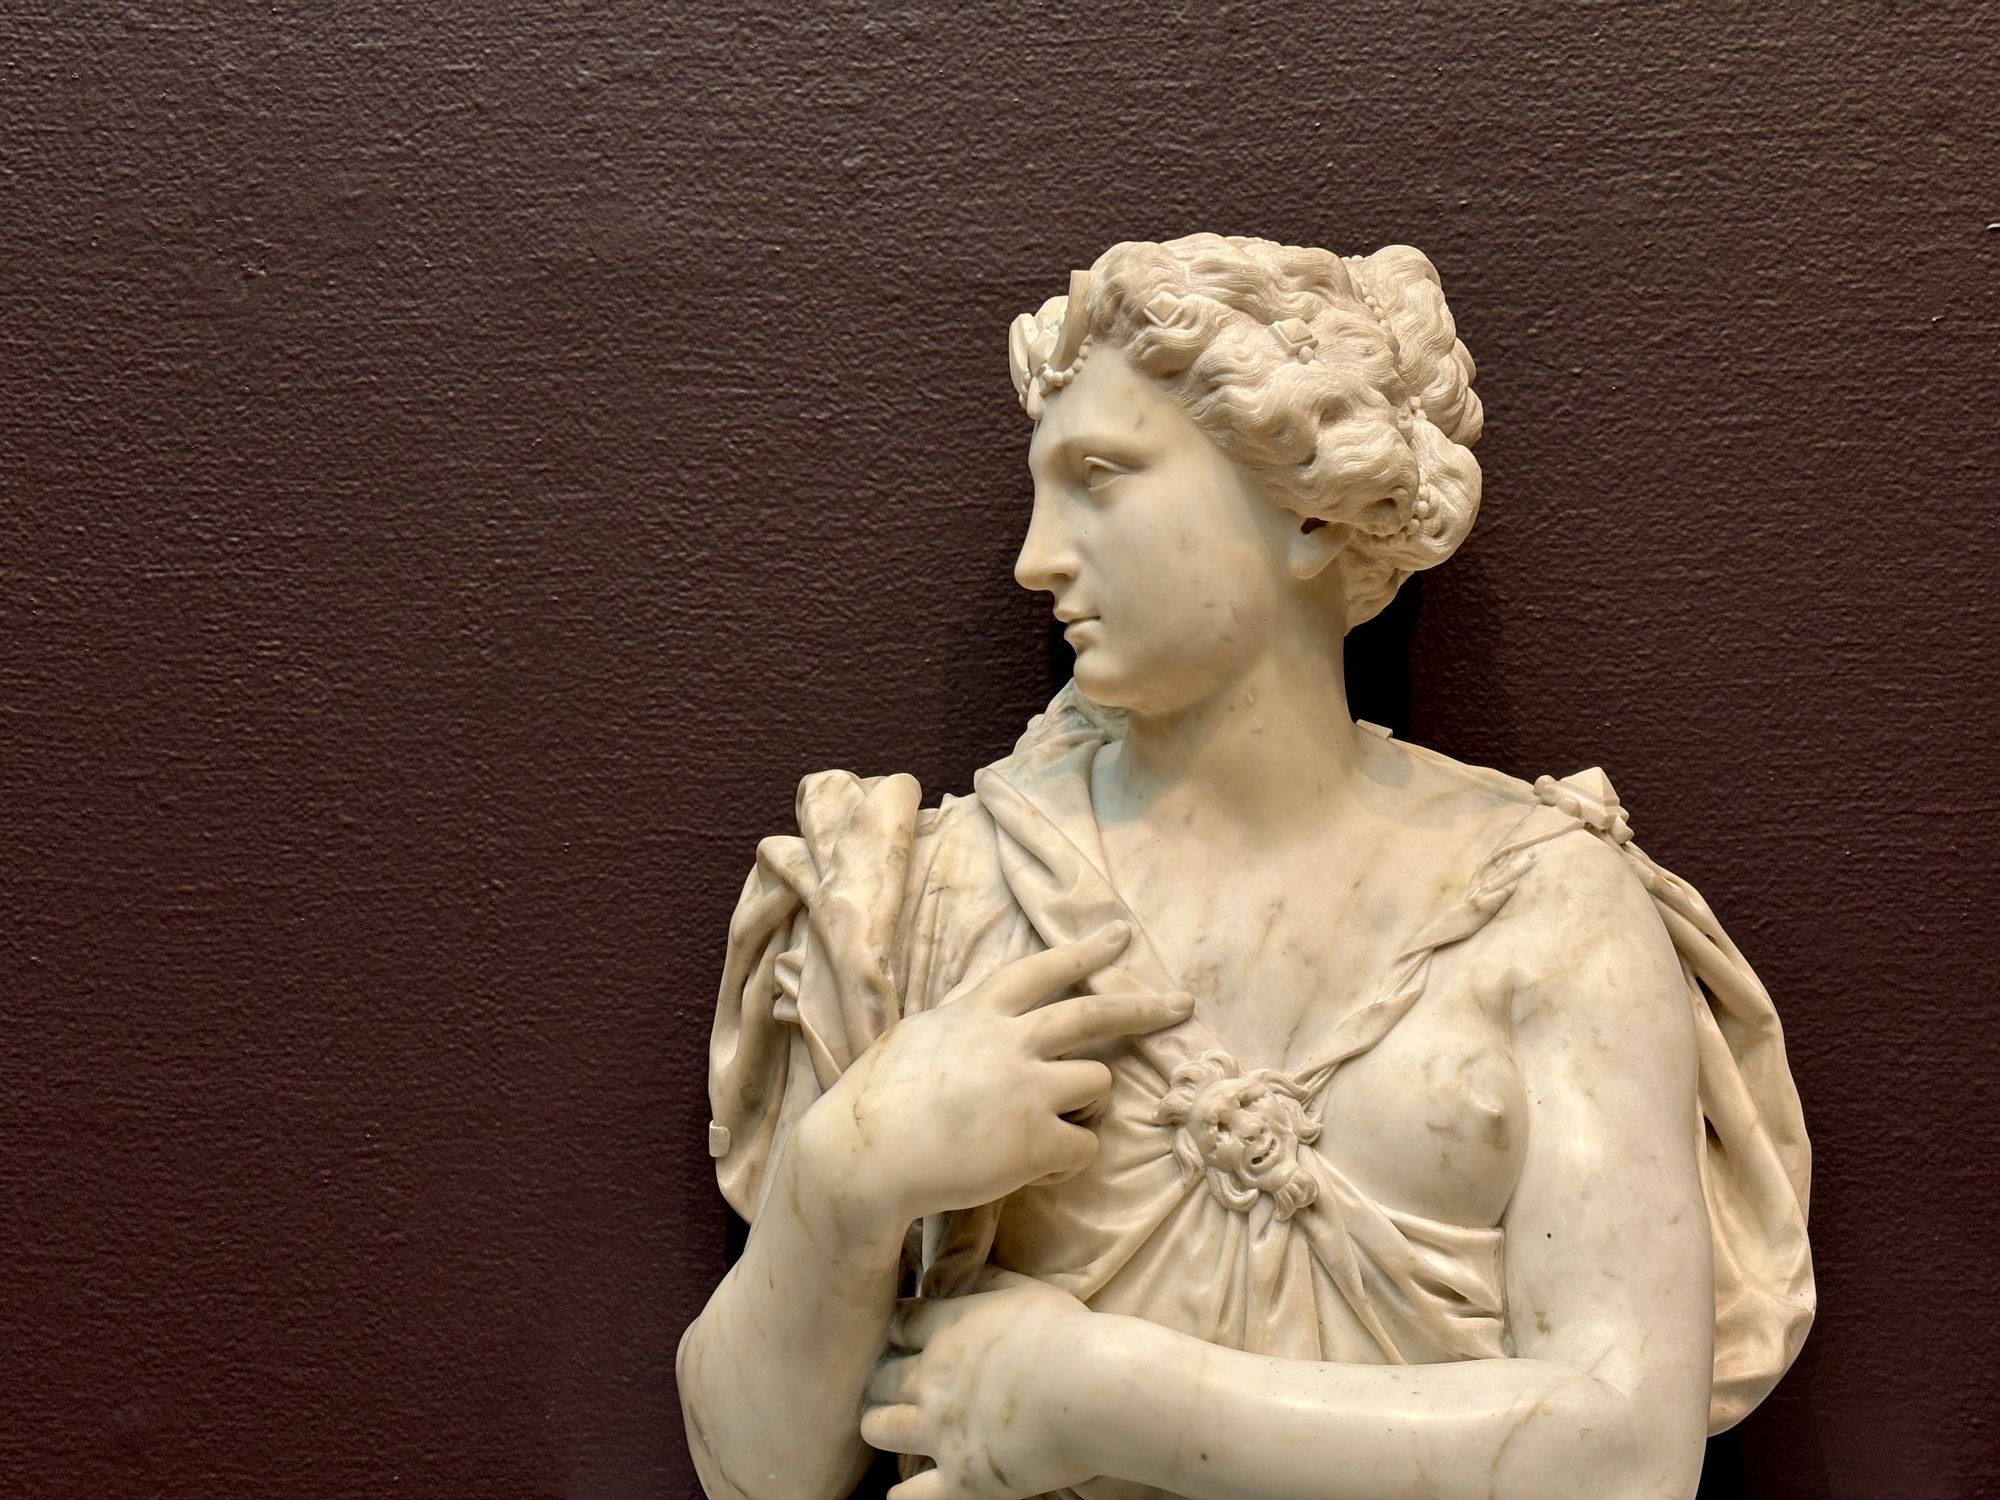 A marble bust of a woman in Grecian dress, head turned to the side and hair dressed with pearls, against a dark painted wall